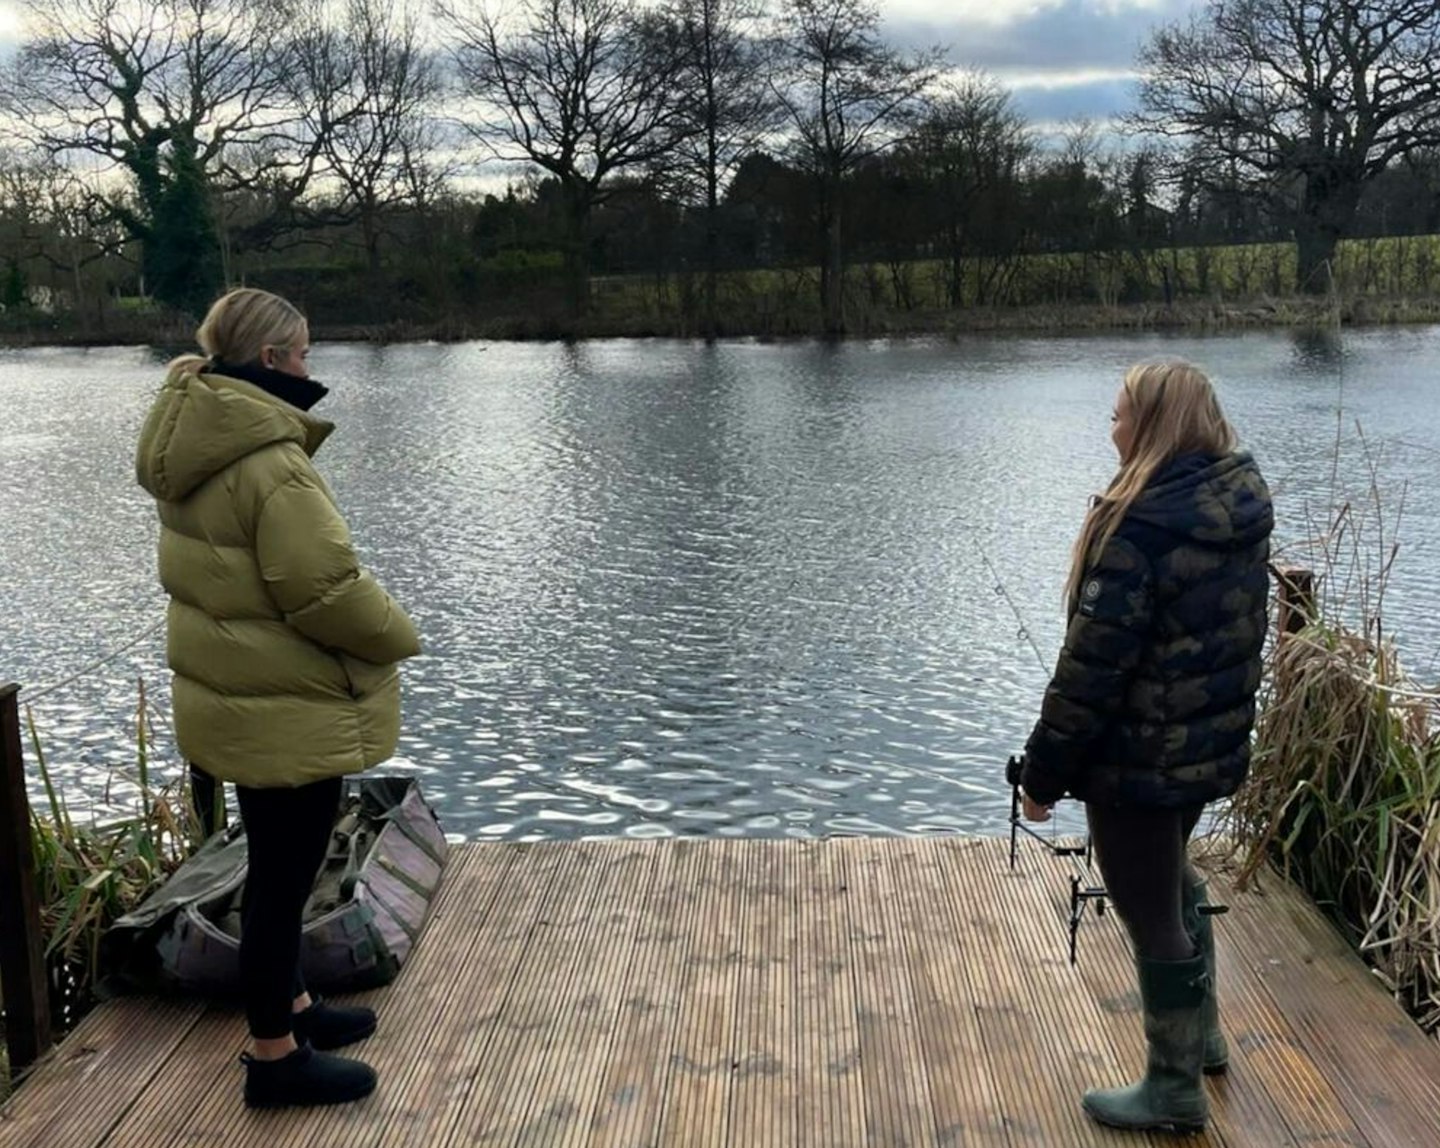 Bev, who is the Ladies Carp Team England Manager, was joined by presenter Vogue Williams at Mill Lodge Fishery in Essex